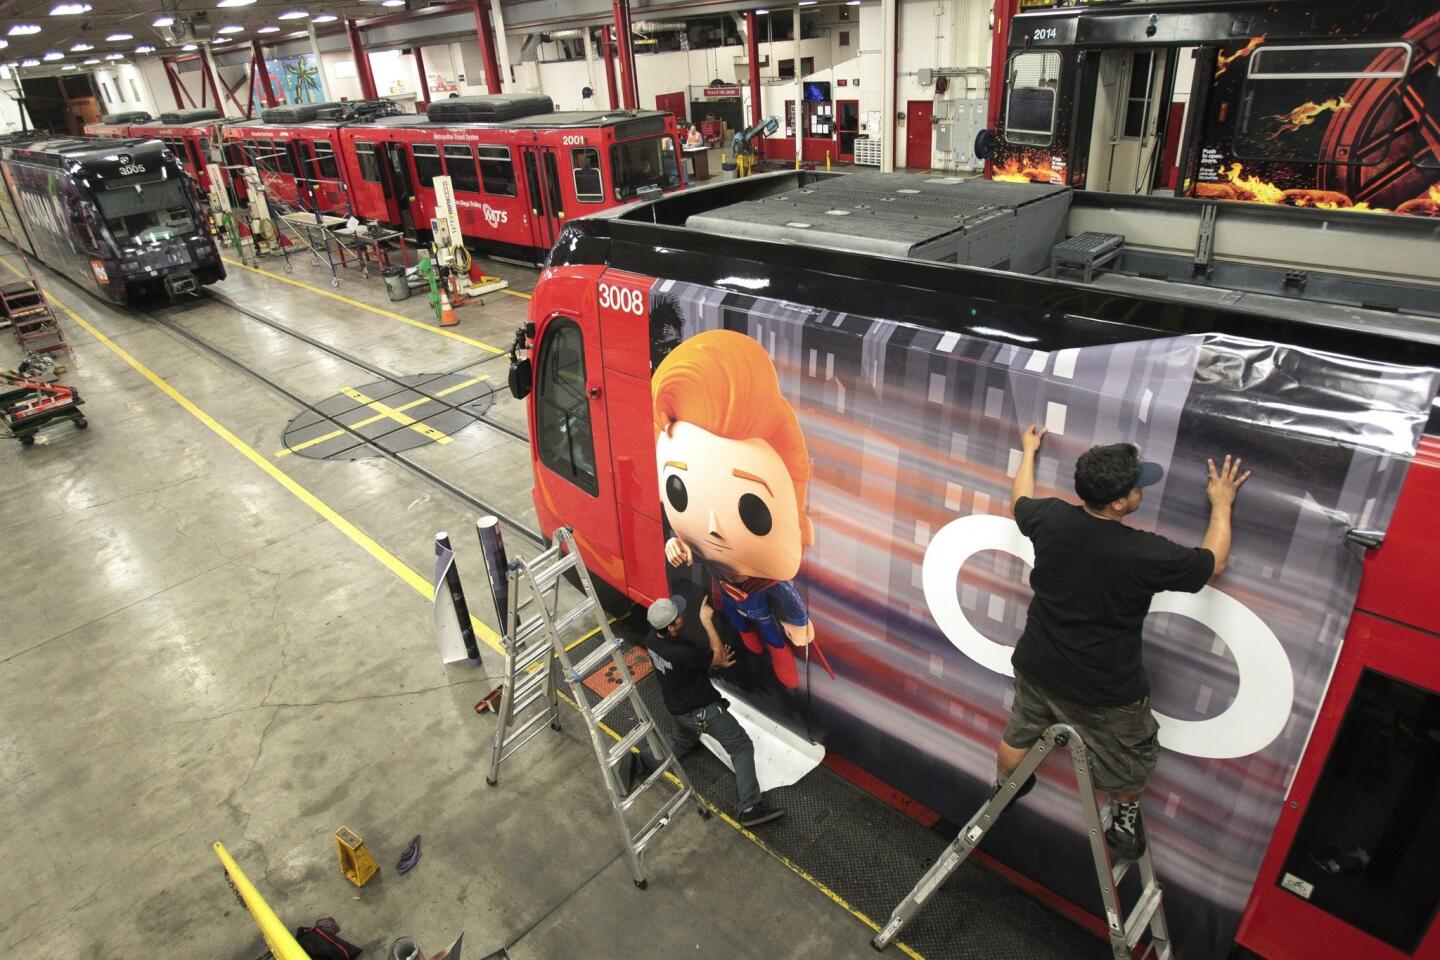 David Garcia, right, and Anthony Soltero put on a section of transit vinyl as they and a crew put on an advertising wrap for TBS television host Conan O'Brien's talk show on a trolley car.